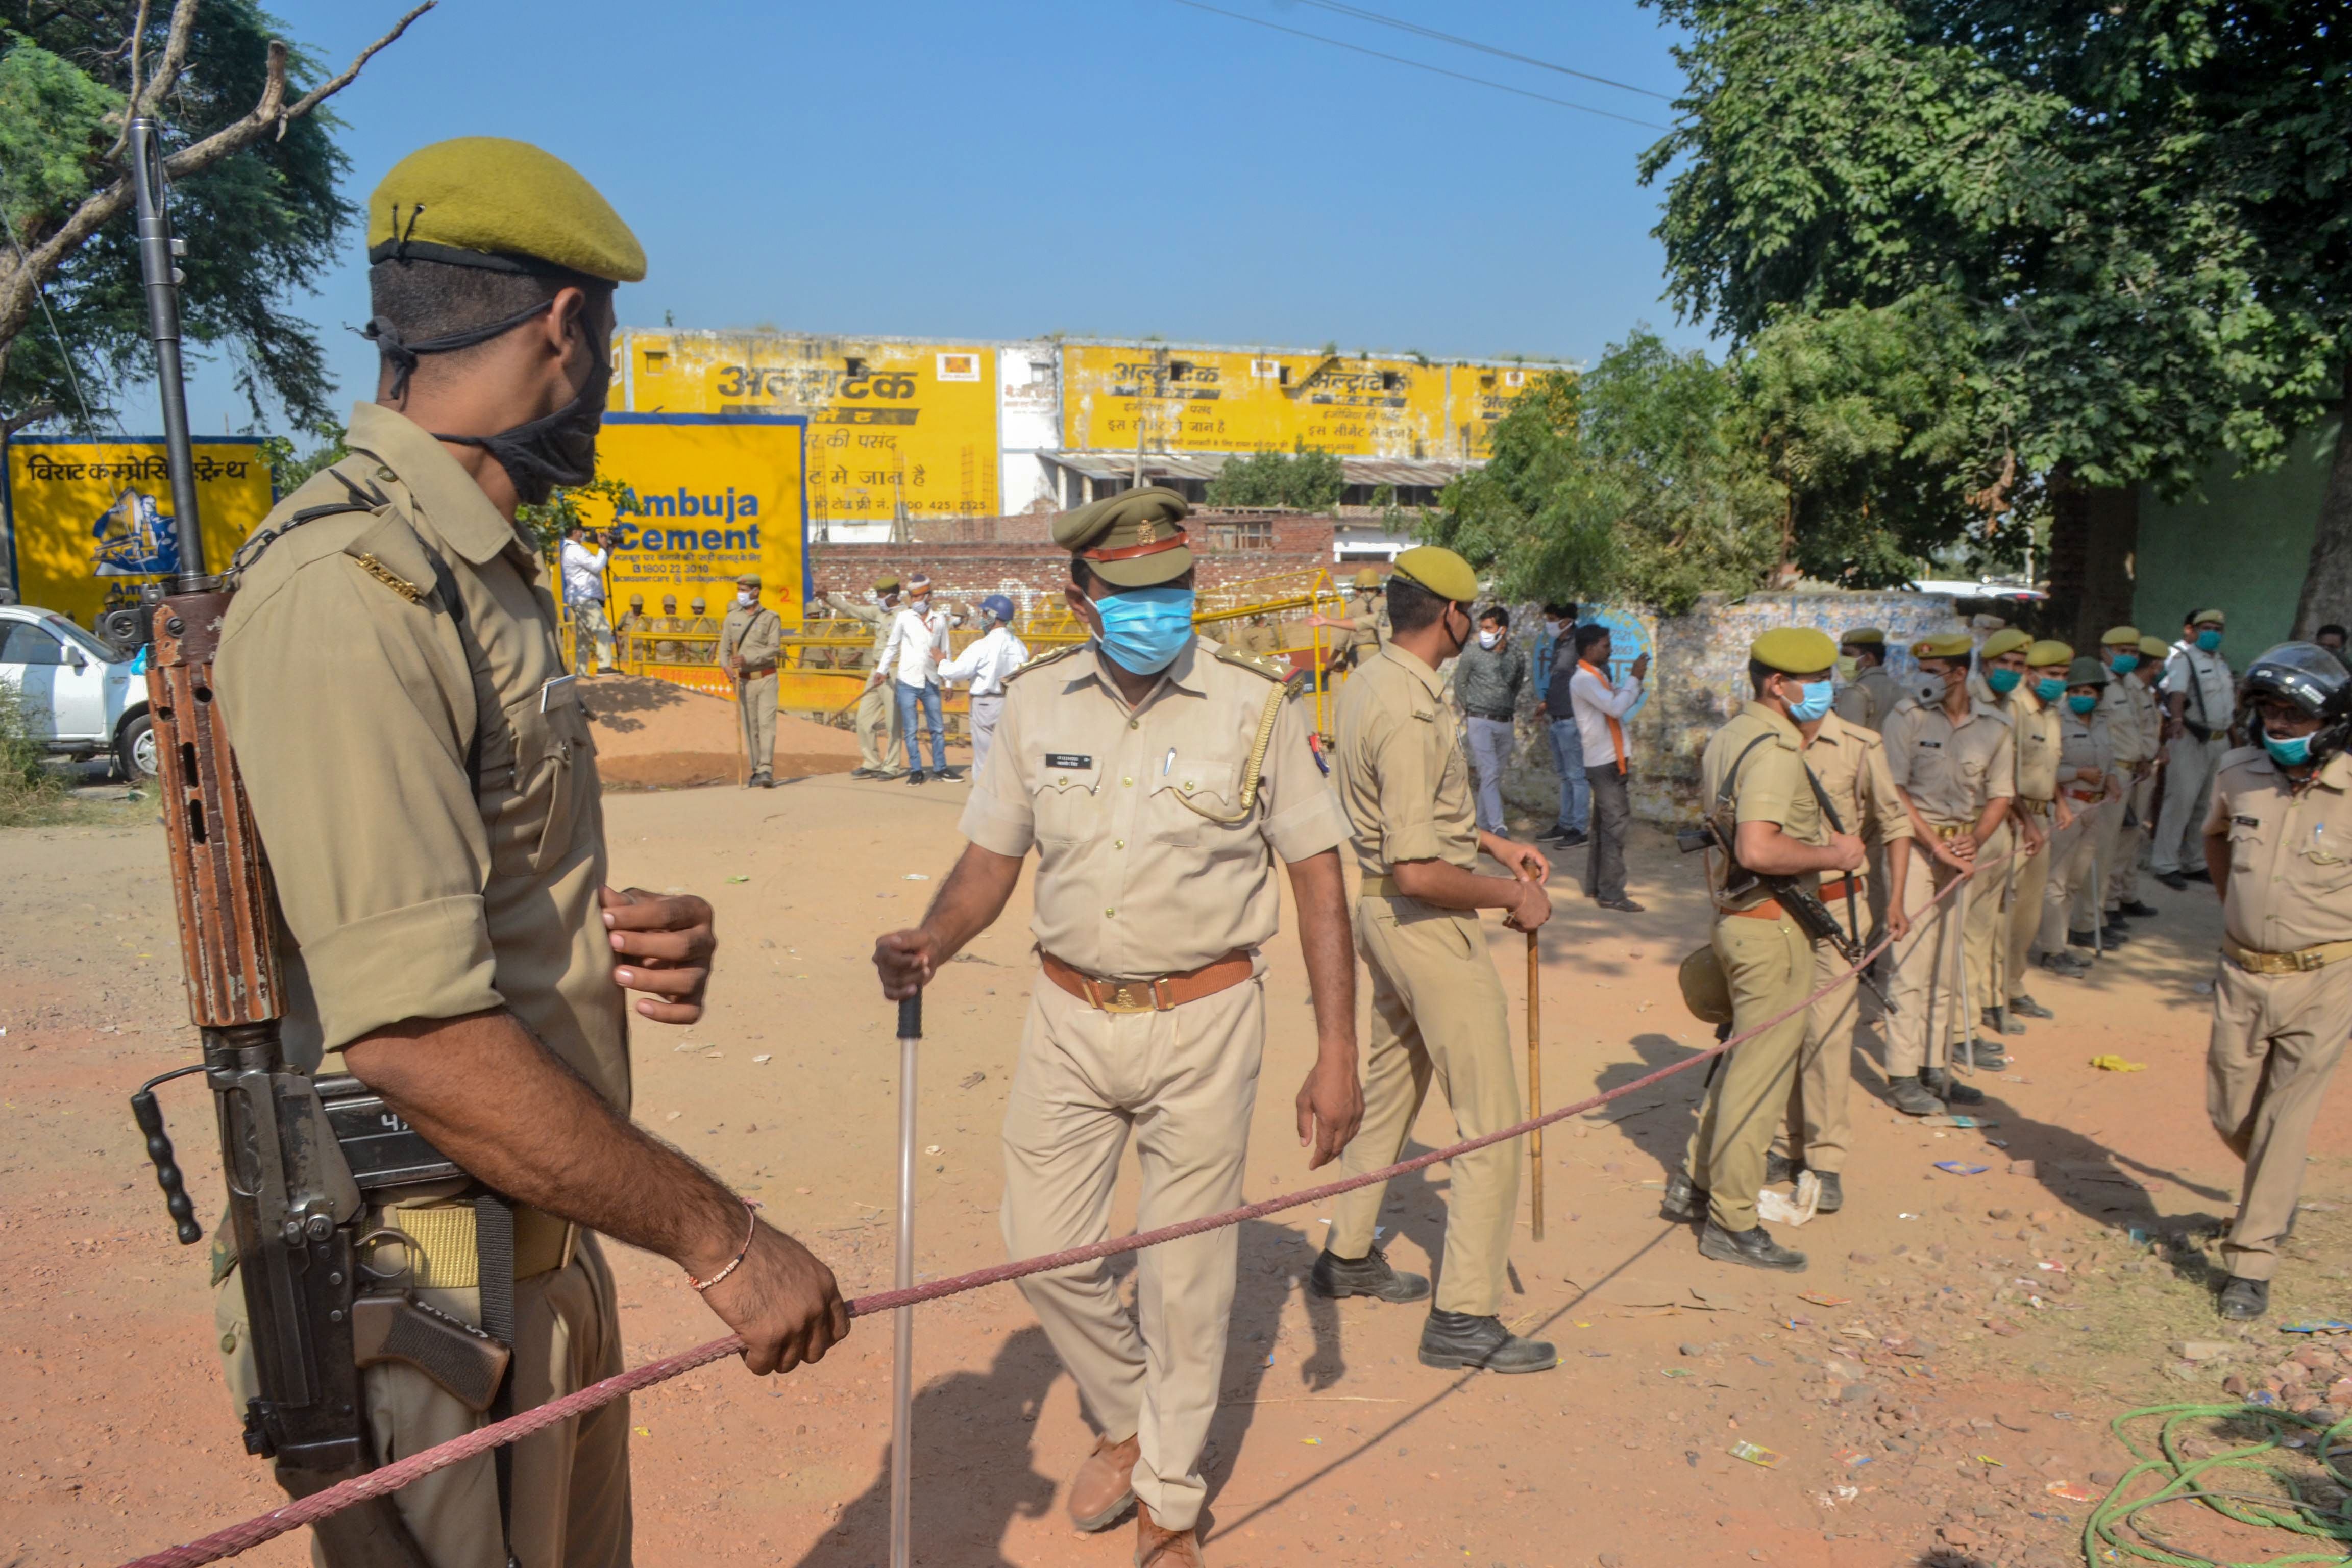 Police in Uttar Pradesh have been criticised for their handling of the Hathras rape case and subsequent political unrest